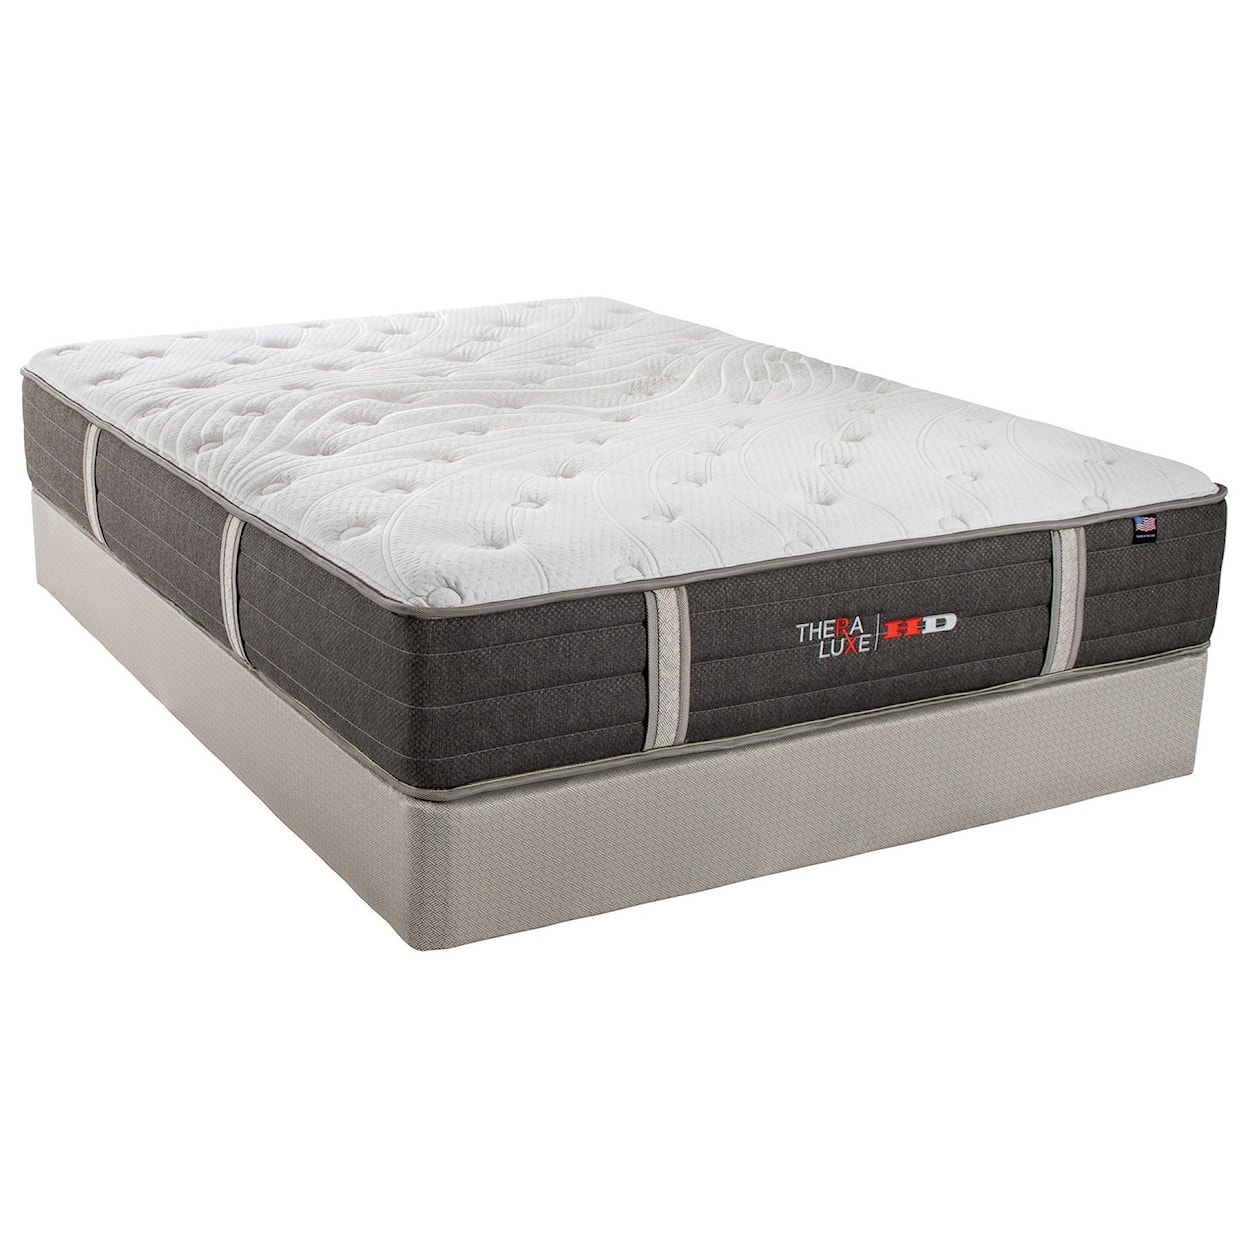 Therapedic Theraluxe Spruce Twin XL Pocketed Coil Mattress Set